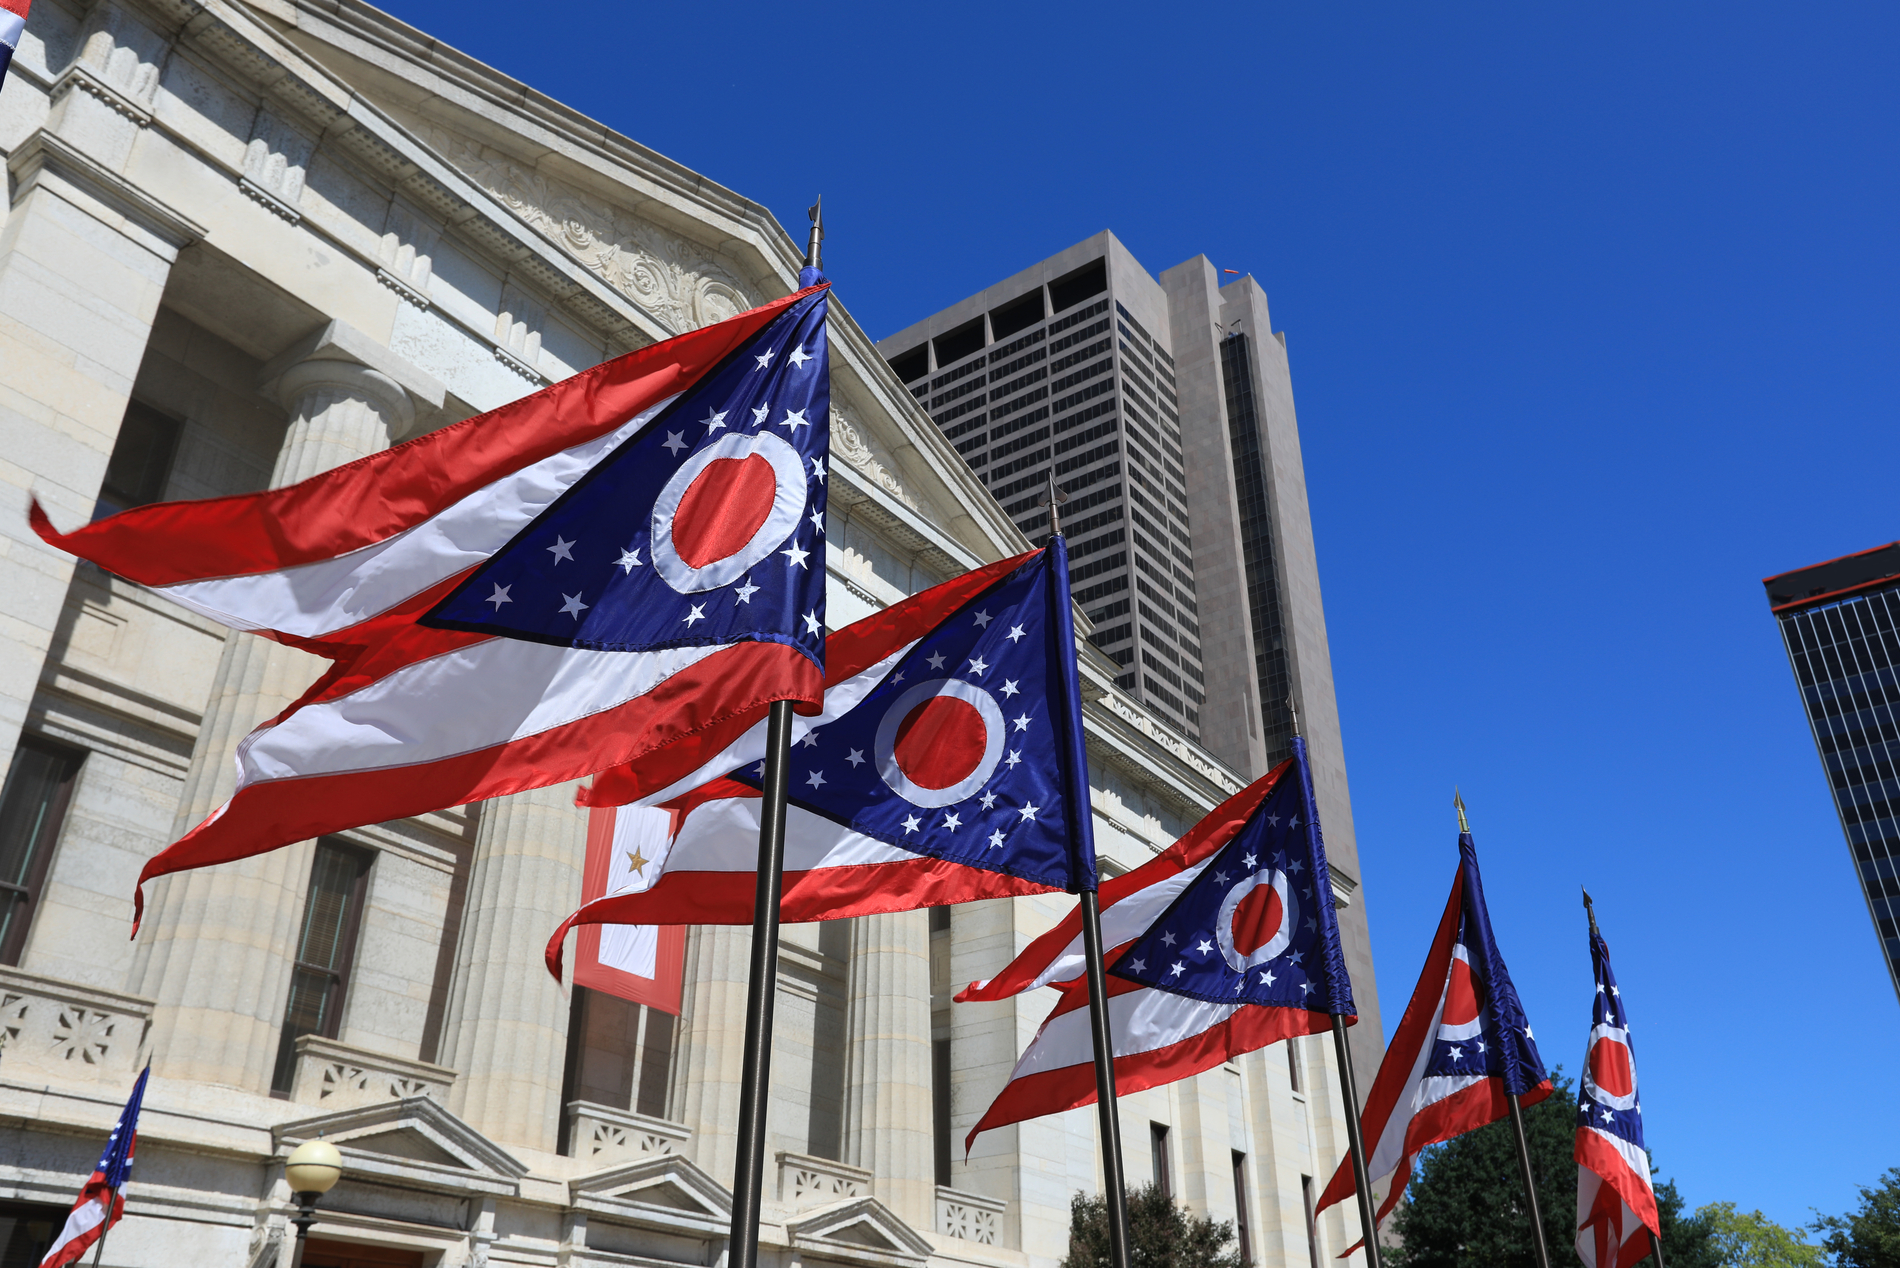 Ohio Becomes First US State To Allow Taxes To Be Paid In Bitcoin